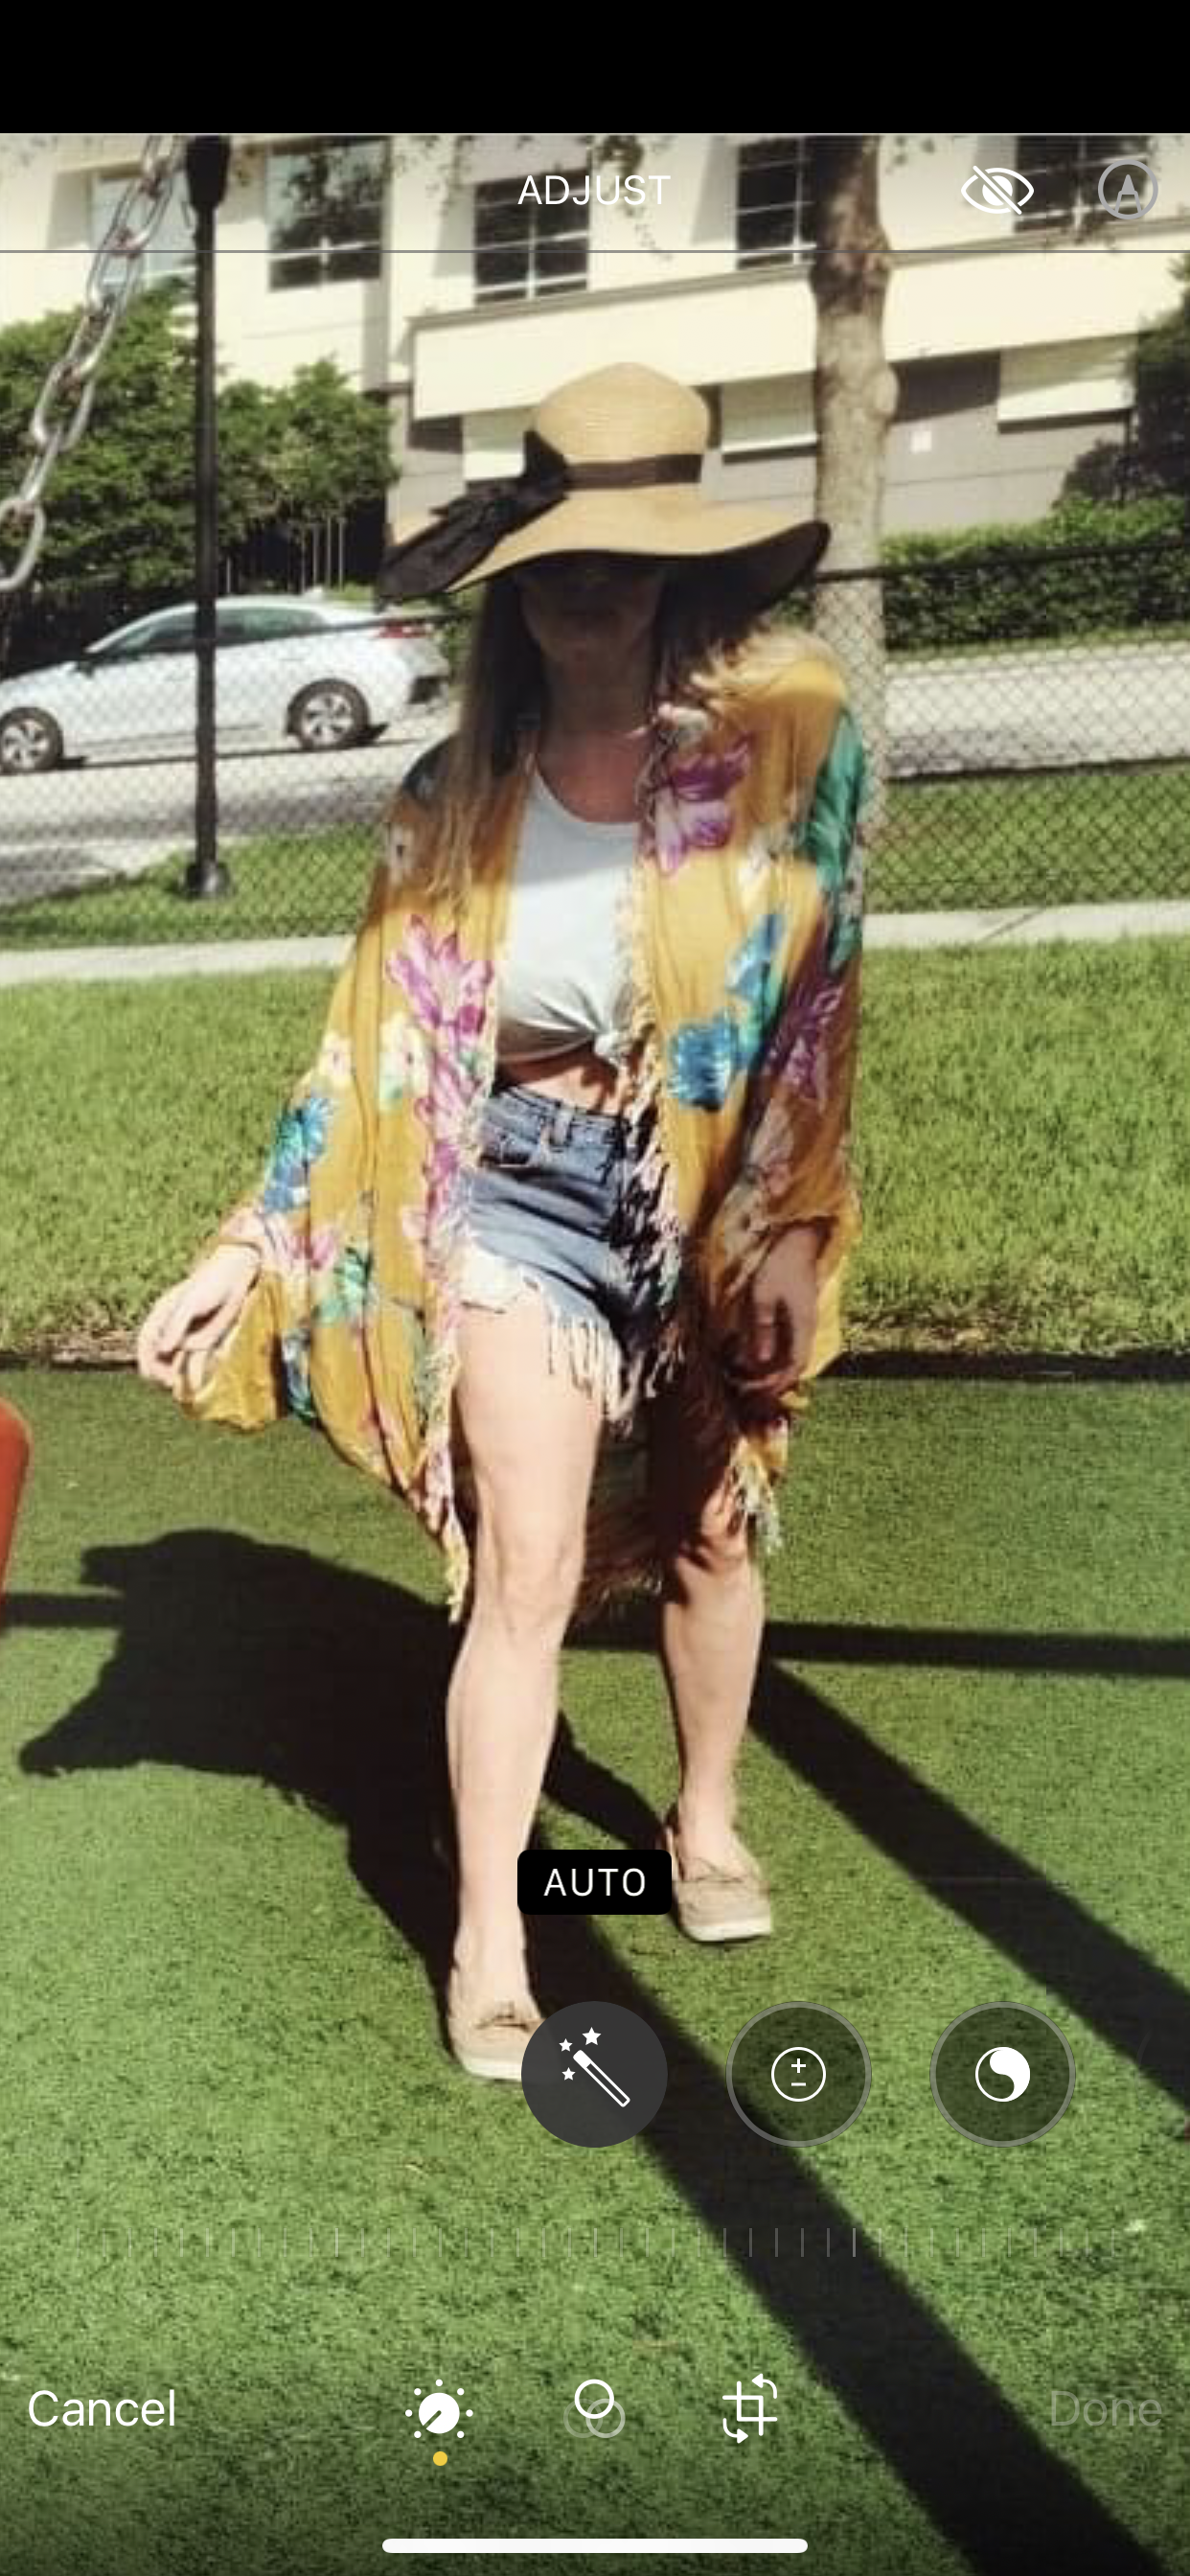 Katie in a big sun hat, beautiful bright shawl with vibrant colors, jean shorts and white tied t-shirt at the park pushing her son on the swings.(he is out of the picture) 